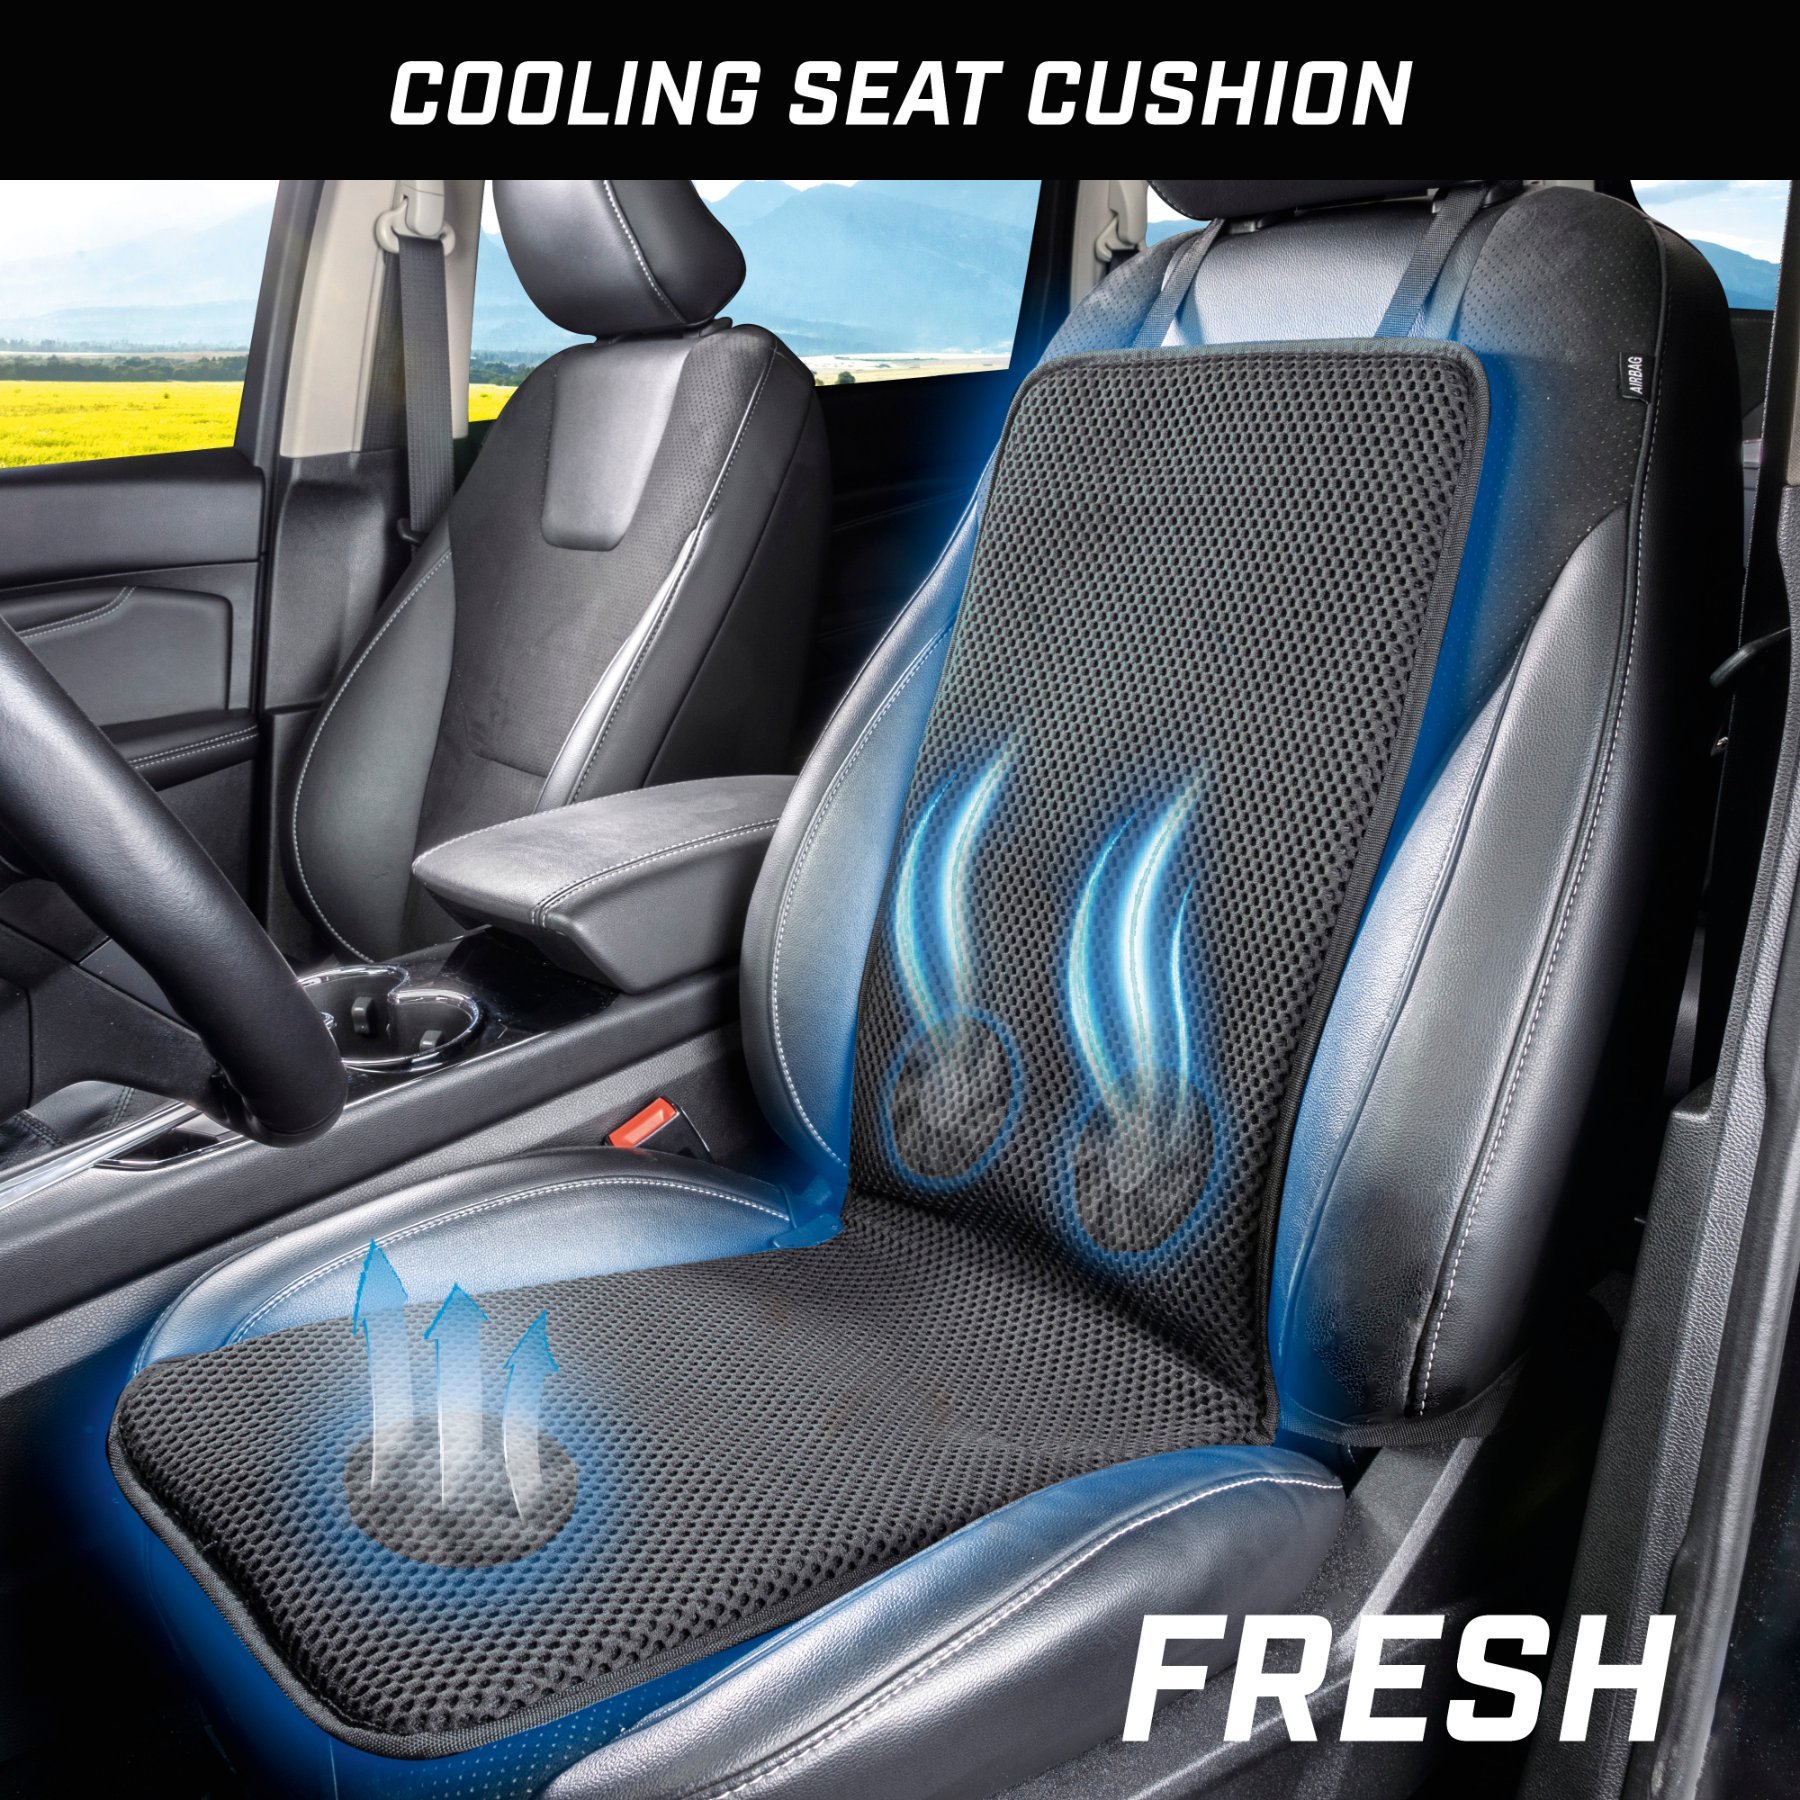 3 Cooling Levels Doingart 1 Pack Cooling Car Seat Cushion 12V Automotive Breathable Seat Cover with Air Conditioning System for Summer Driving Red and Black 